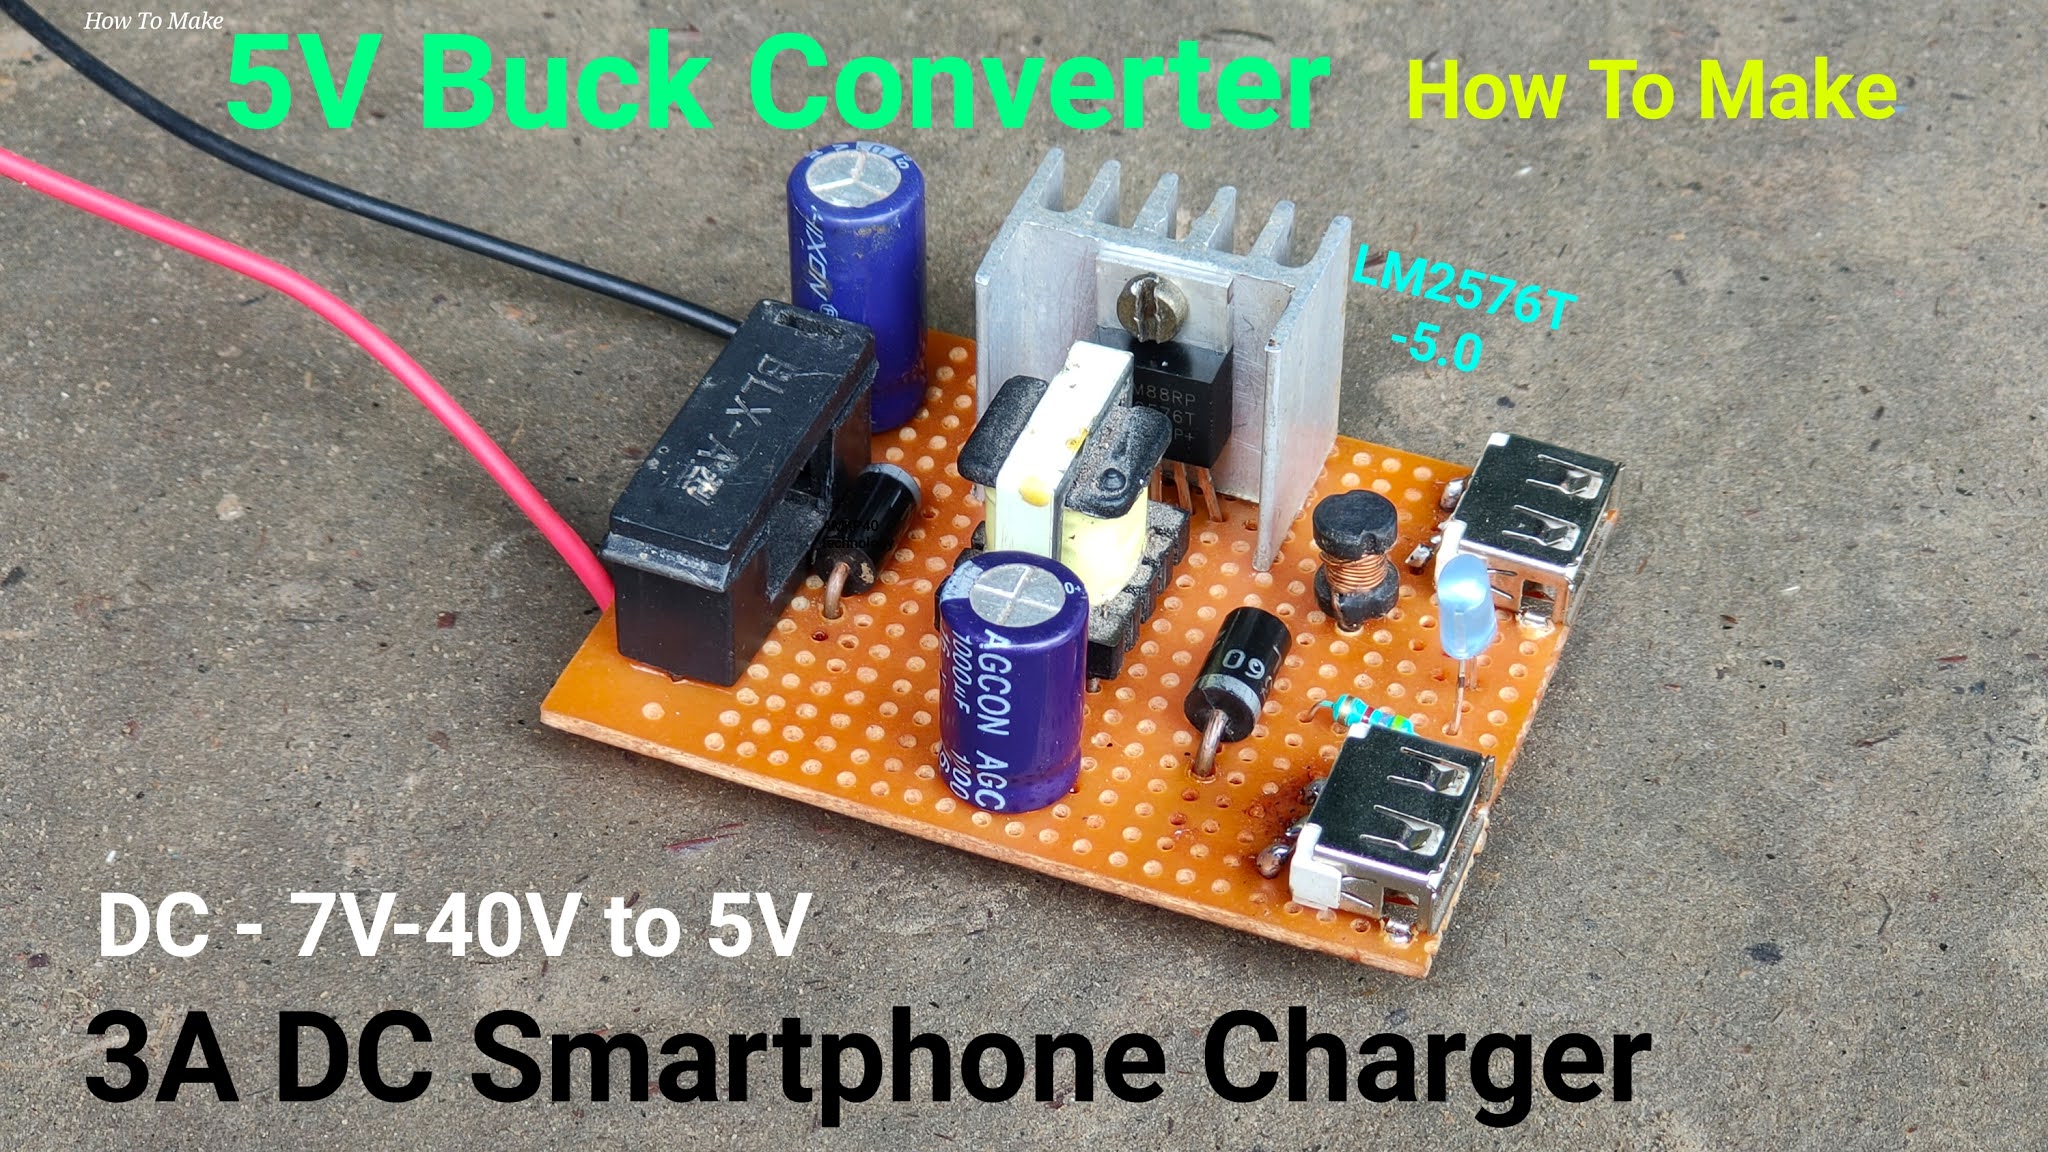 DC To DC 5V 3A Buck Converter Circuit Diagram, or 3A DC Smartphone